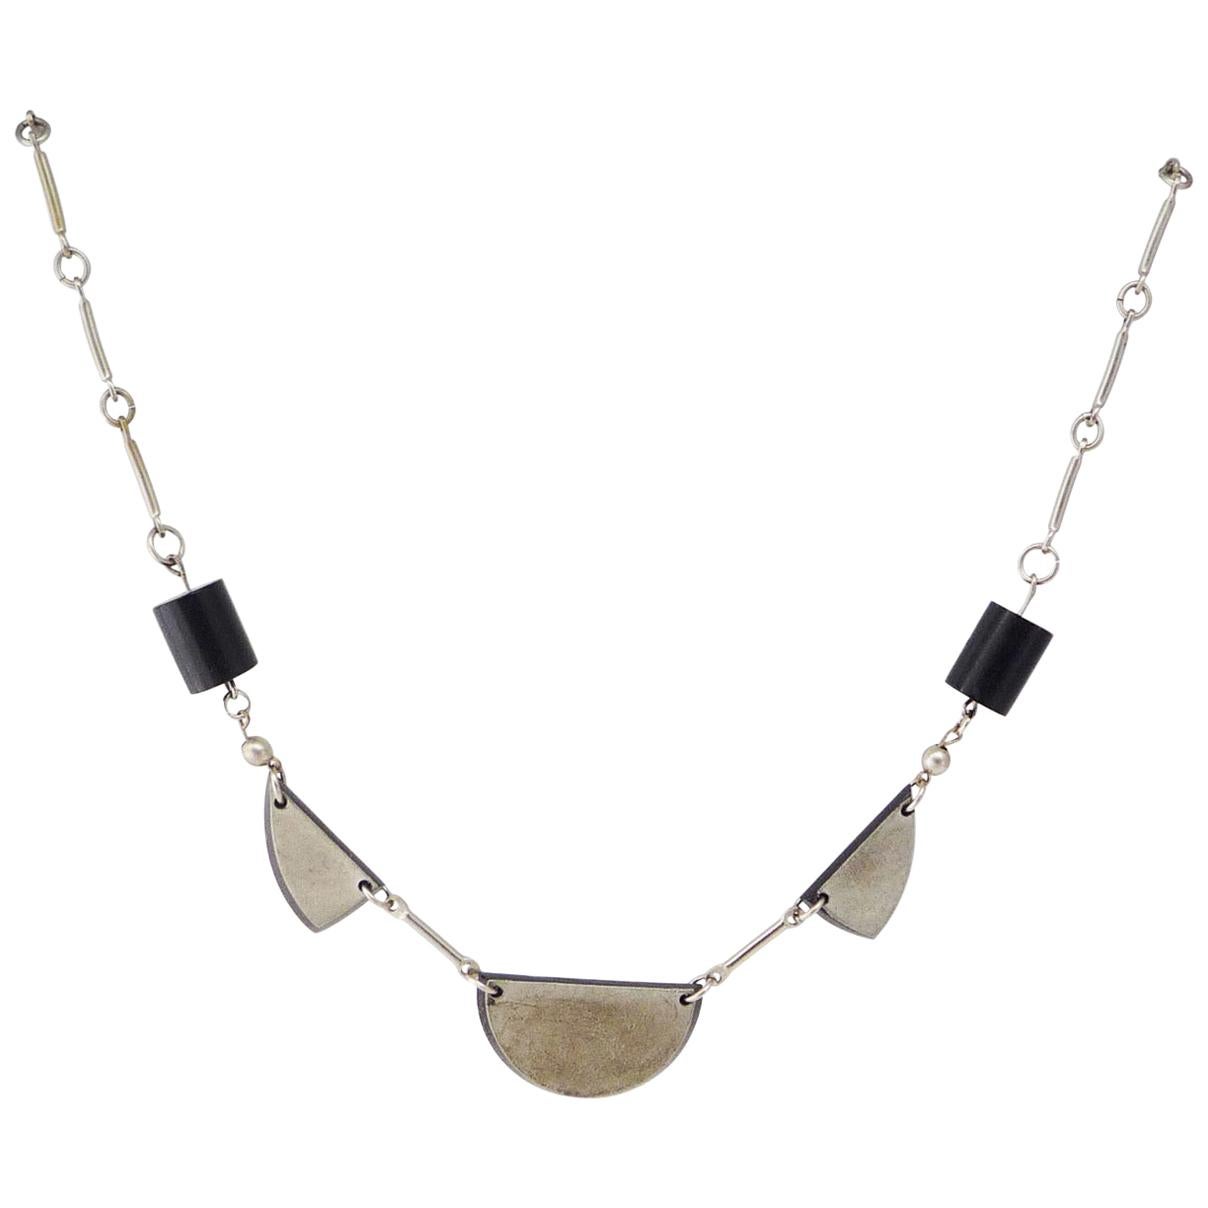 Collier in Chrome and Galalith by Jakob Bengel, around 1920/30 For Sale